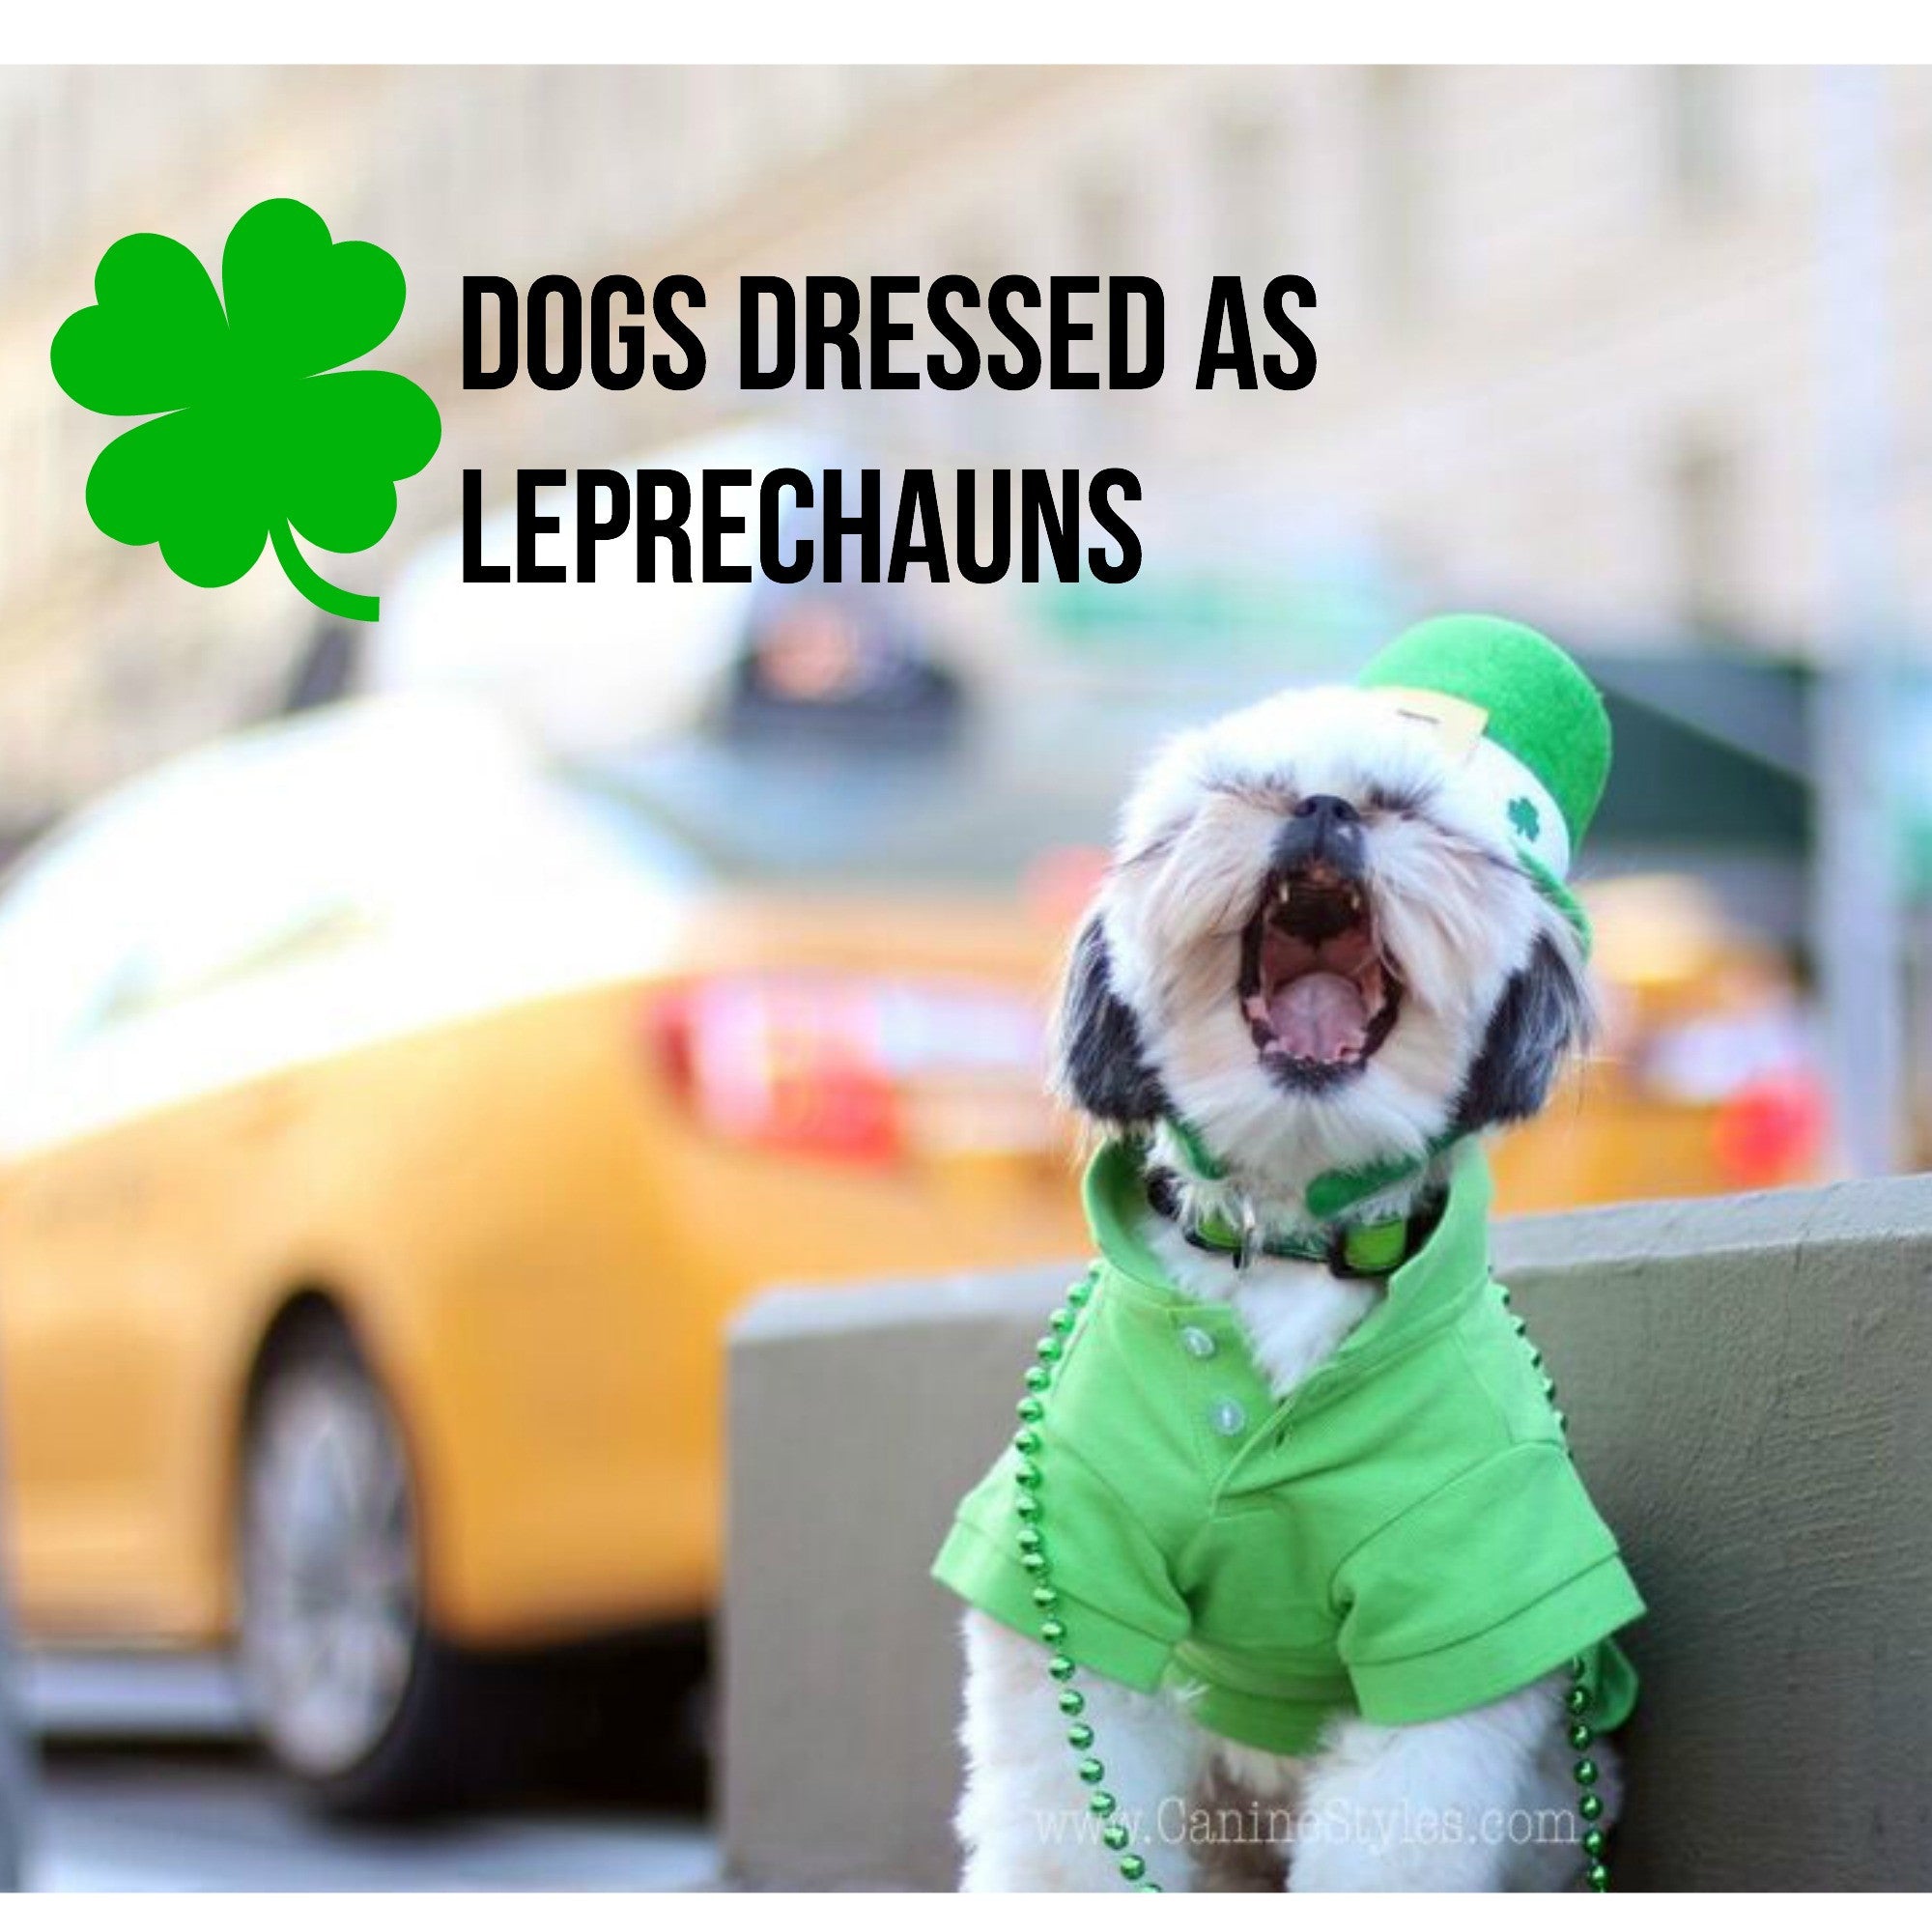 These Dogs are Dressed As Leprechauns And You won't believe the Cuteness!! Wow!